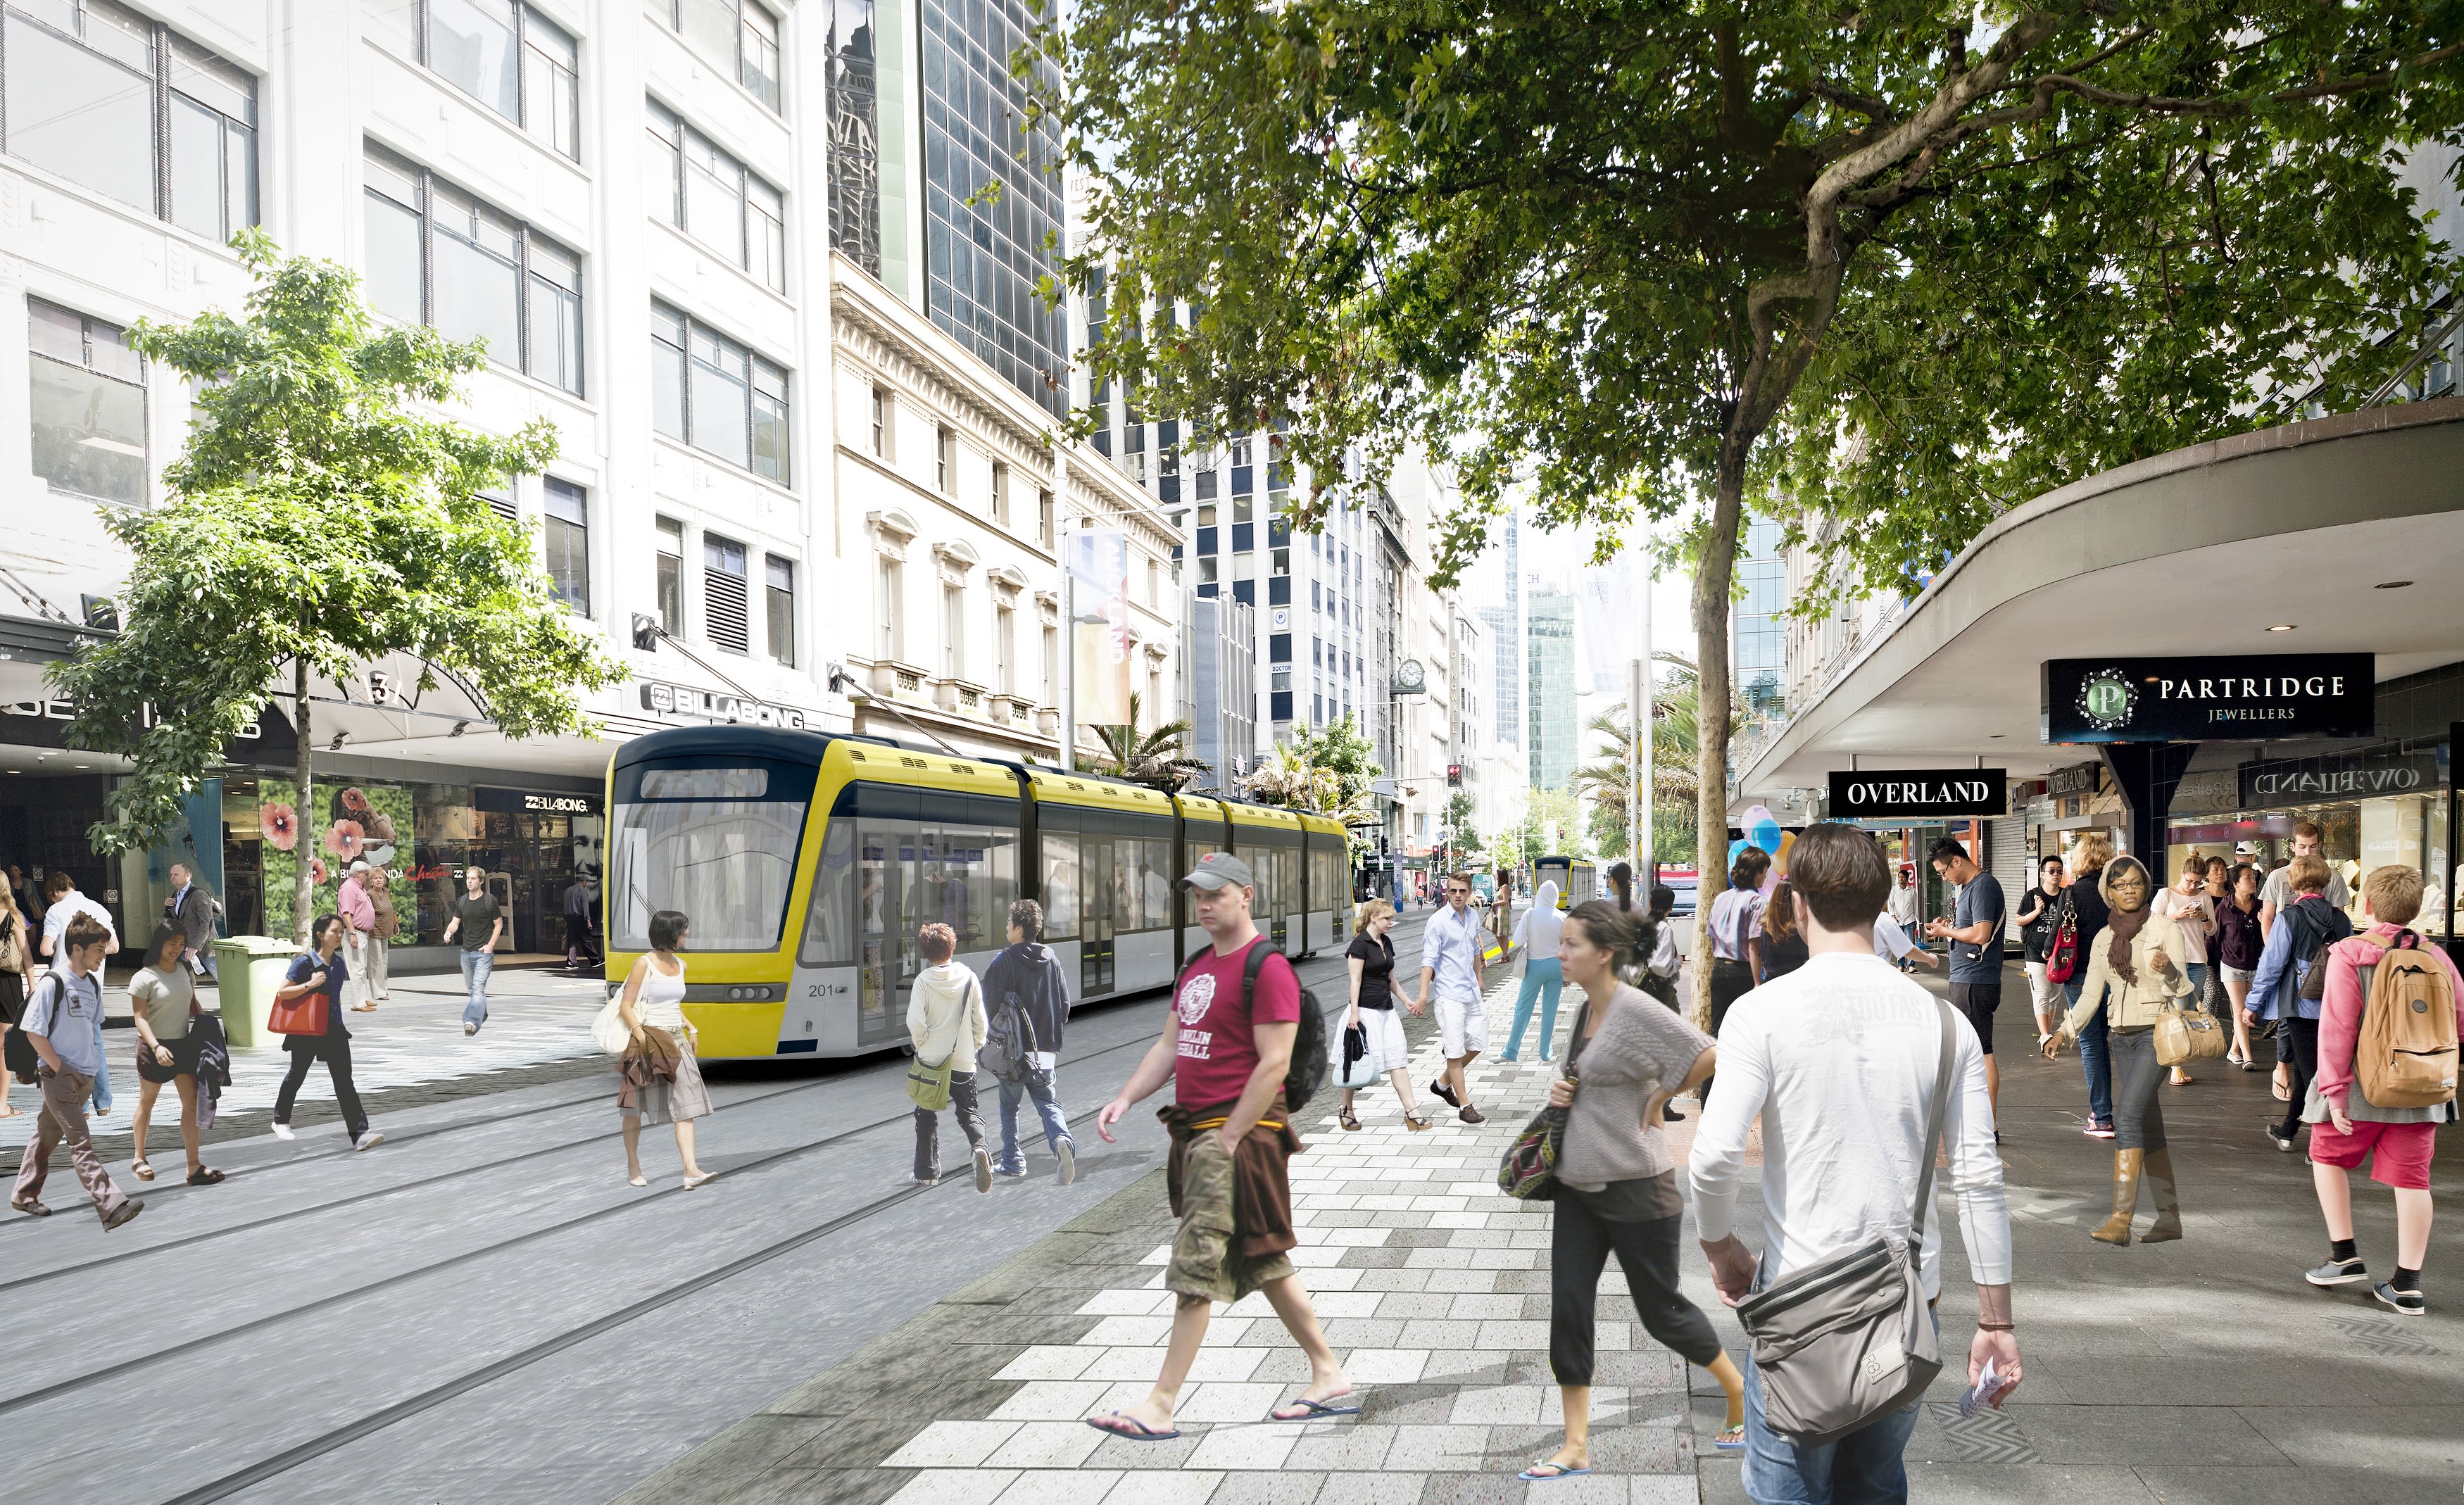 Queen Street pedestrianised with light rail